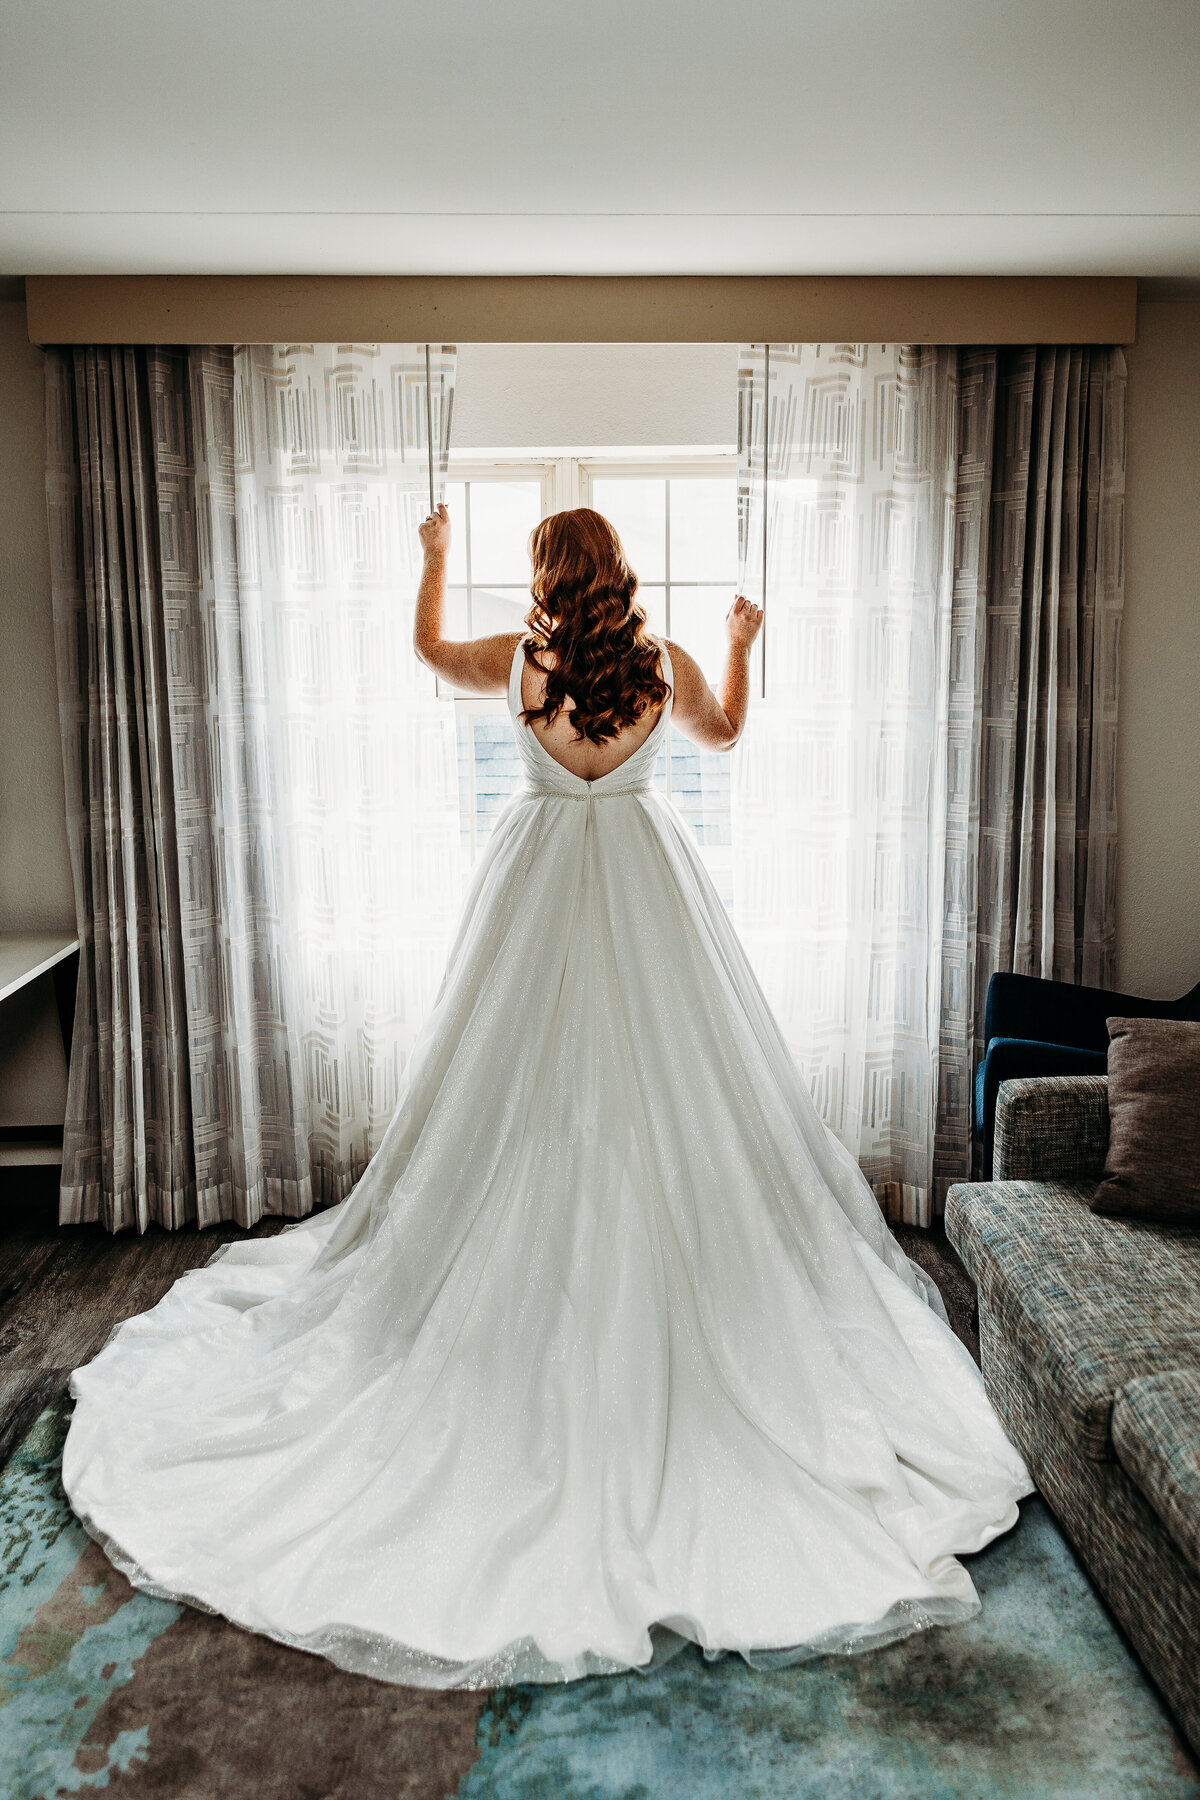 An elegant bridal shot from behind looking out a window.